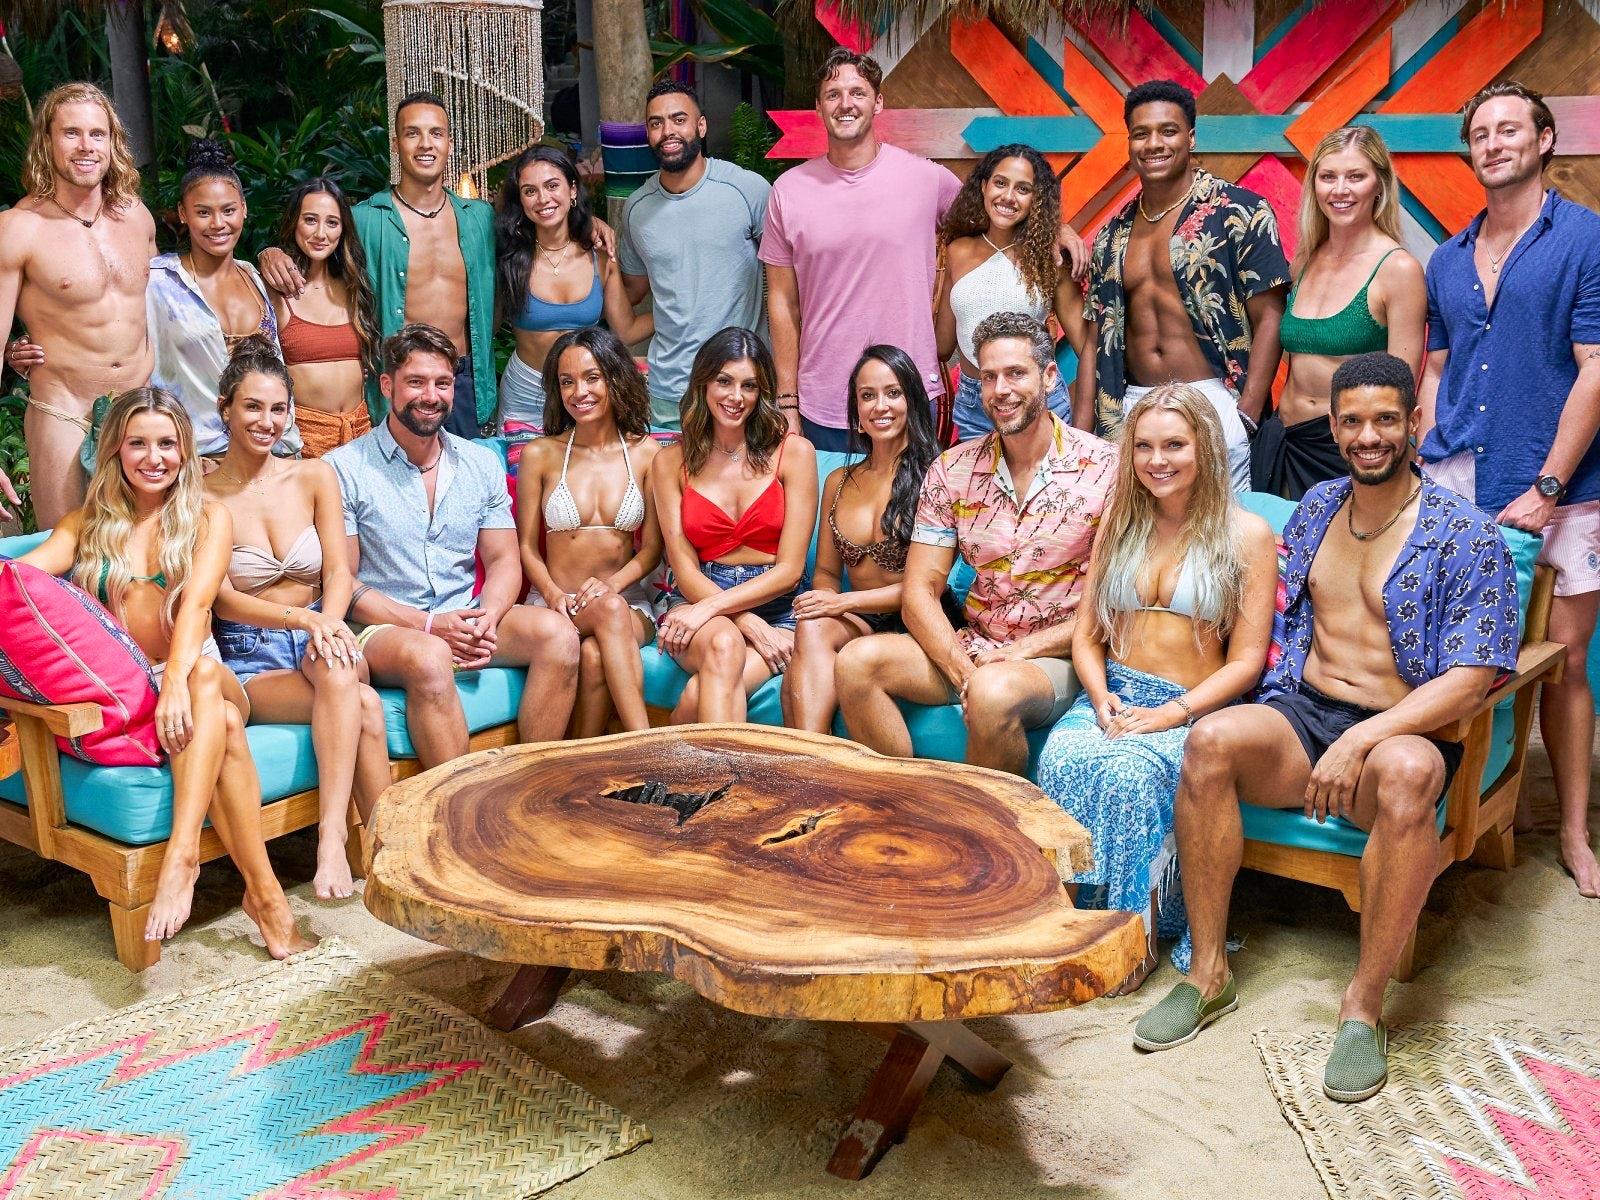 'Bachelor in Paradise' Spoilers Who ends up together? Which couples